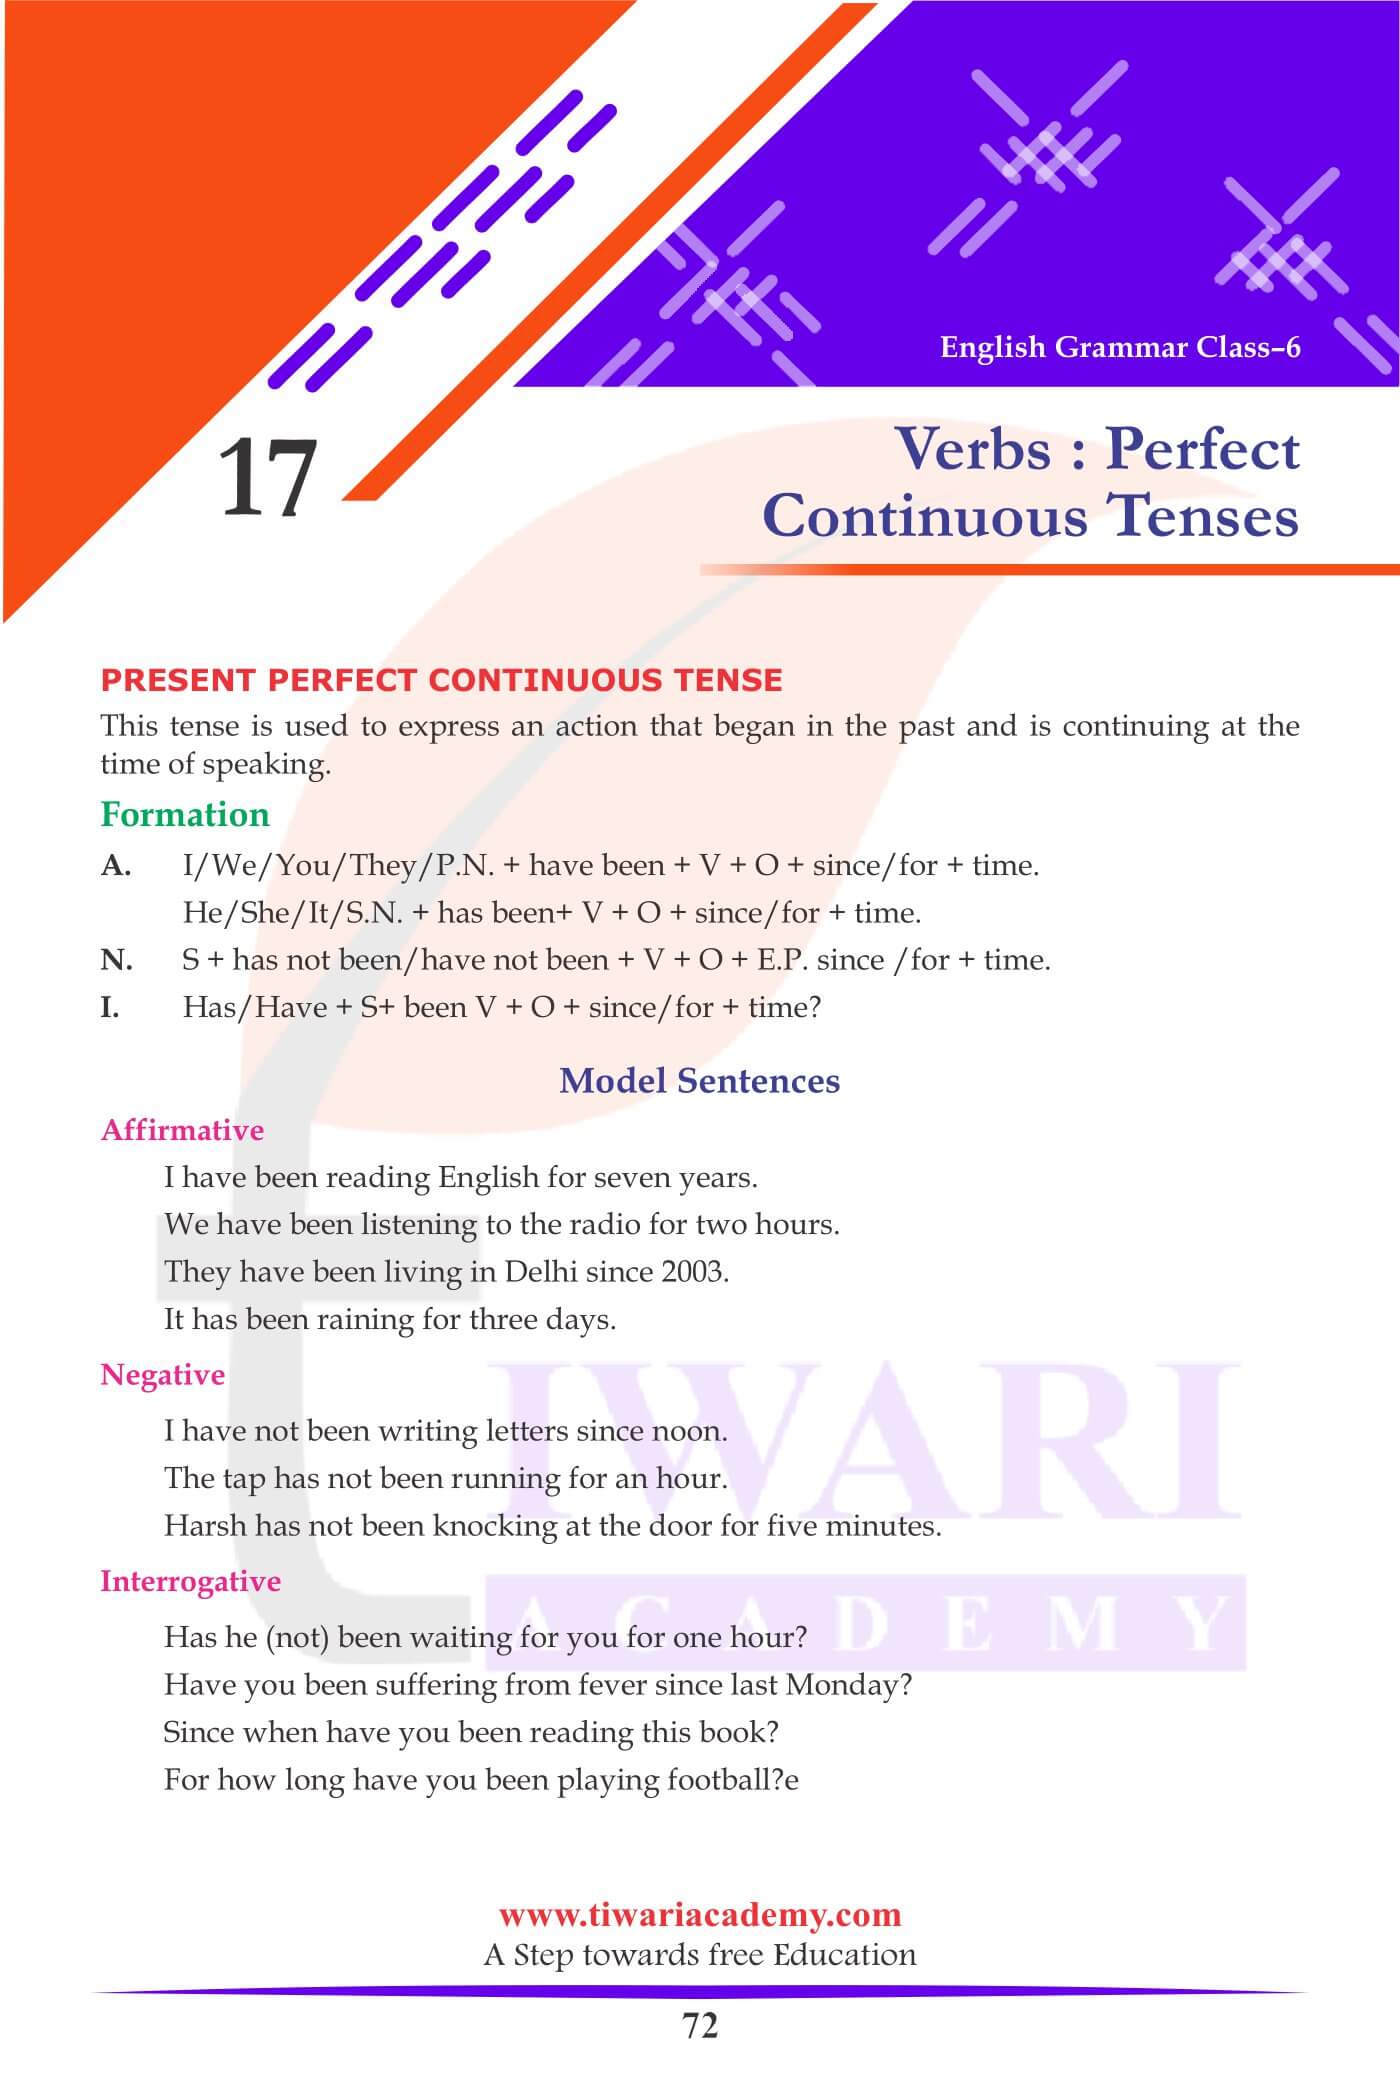 Class 6 English Grammar Chapter 17 Verbs Perfect Continuous Tense